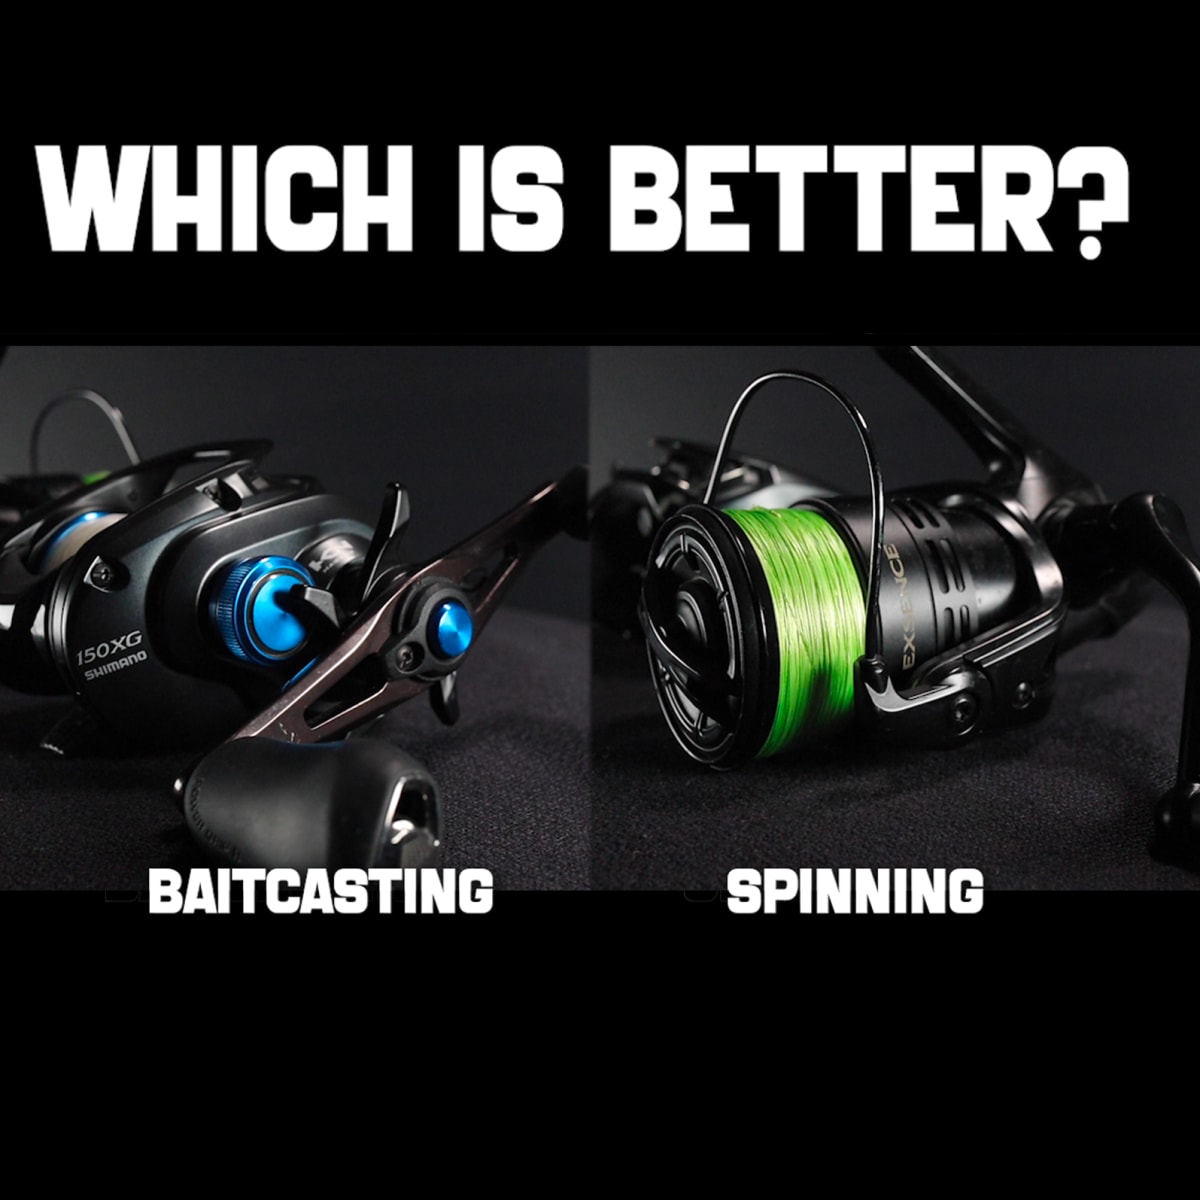 Is a Baitcast Reel or a Spinning Reel Better for Bass Fishing